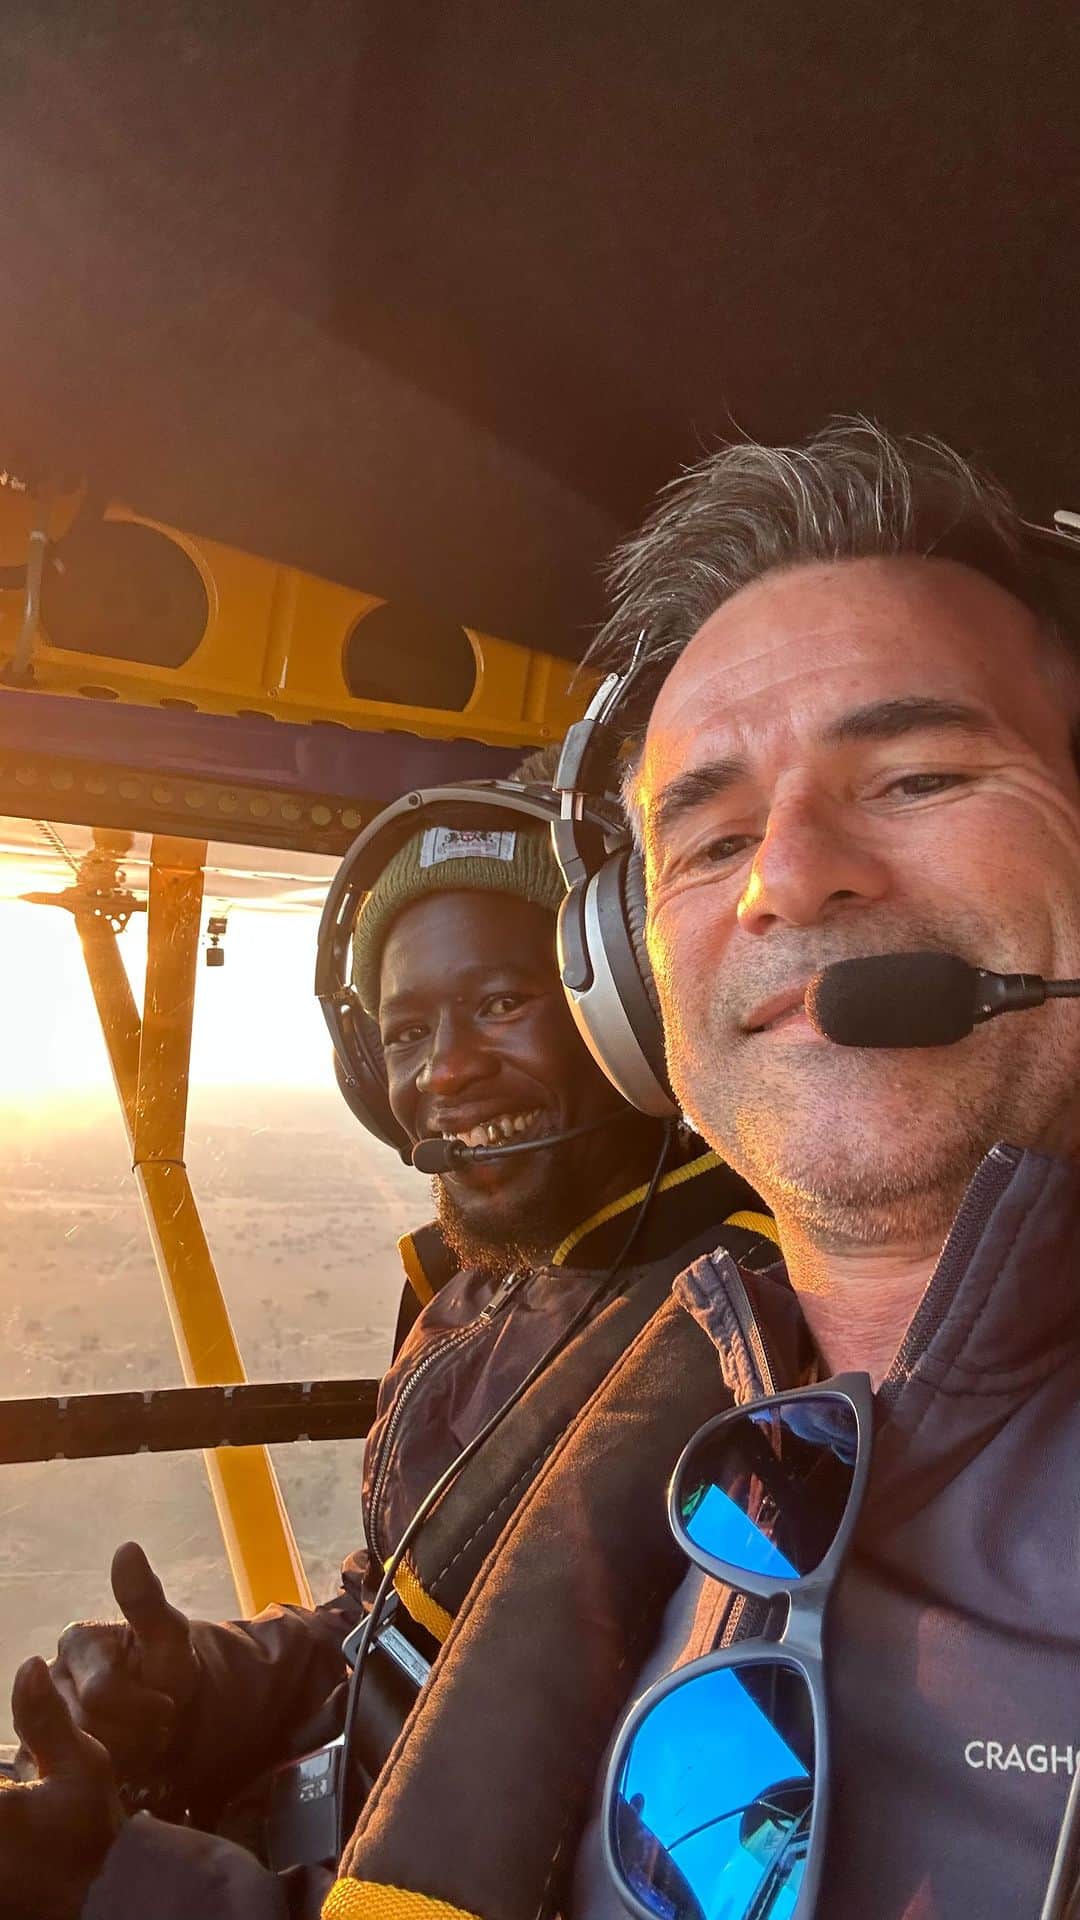 Kevin Richardson LionWhisperer のインスタグラム：「Been taking the staff in the plane every Friday, to show them what it’s like, how the sanctuary and farm looks from above and the land my foundation wants to next acquire so that the reserve can expand. For many like Clarence, it’s his first time in an airplane. His face says it all. I don’t take flying for granted however you do get used to it and seeing Clarence’s face and hearing how excited he was, made me realize, once again, how blessed I am to be able to do this so frequently. For Clarence this was a magical experience, one he’ll talk about for years to come. #firstflight #sunriseflight #earlybird #timetofly #savannahaircraft #mindfullymade #mycraghoppers  🎥 @gopro」